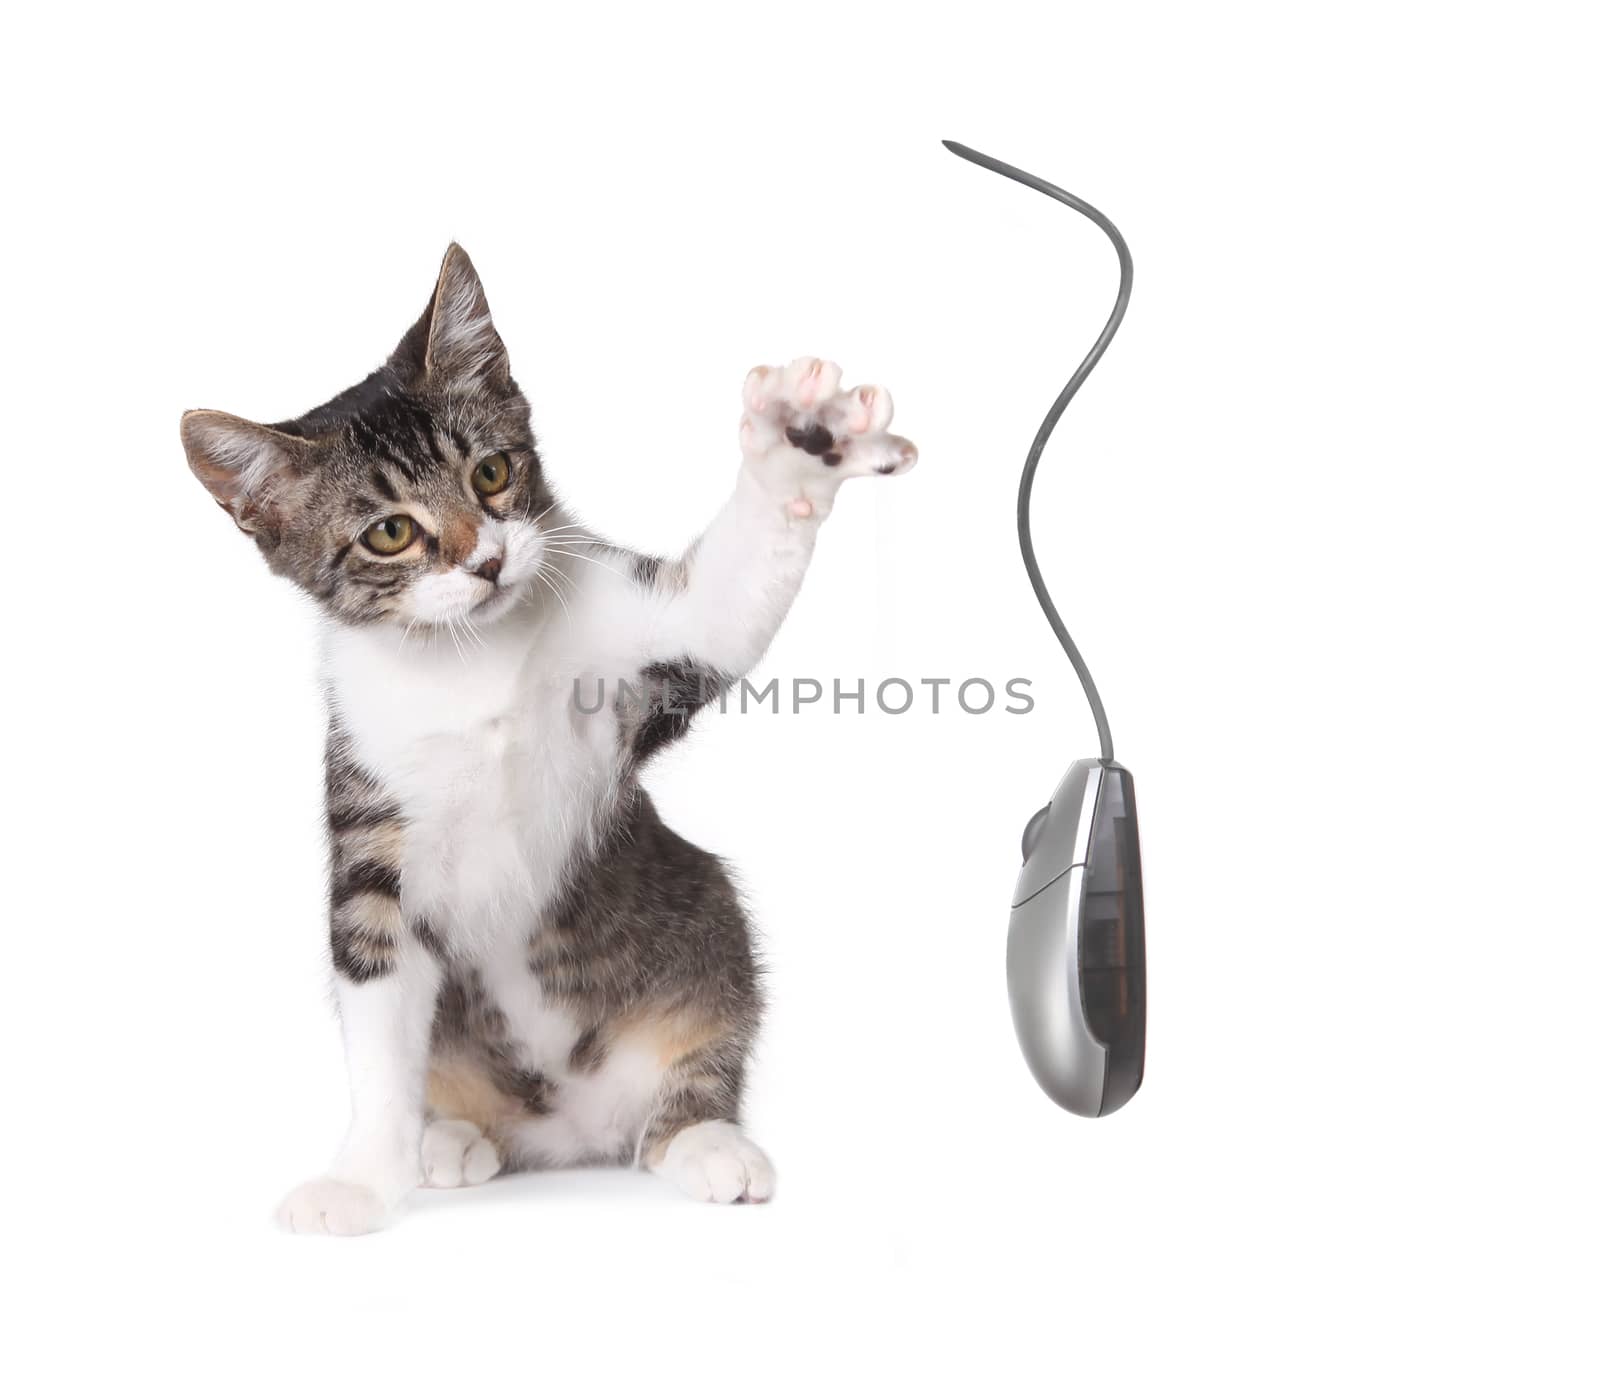 Kitten Swatting a Computer Mouse by tobkatrina